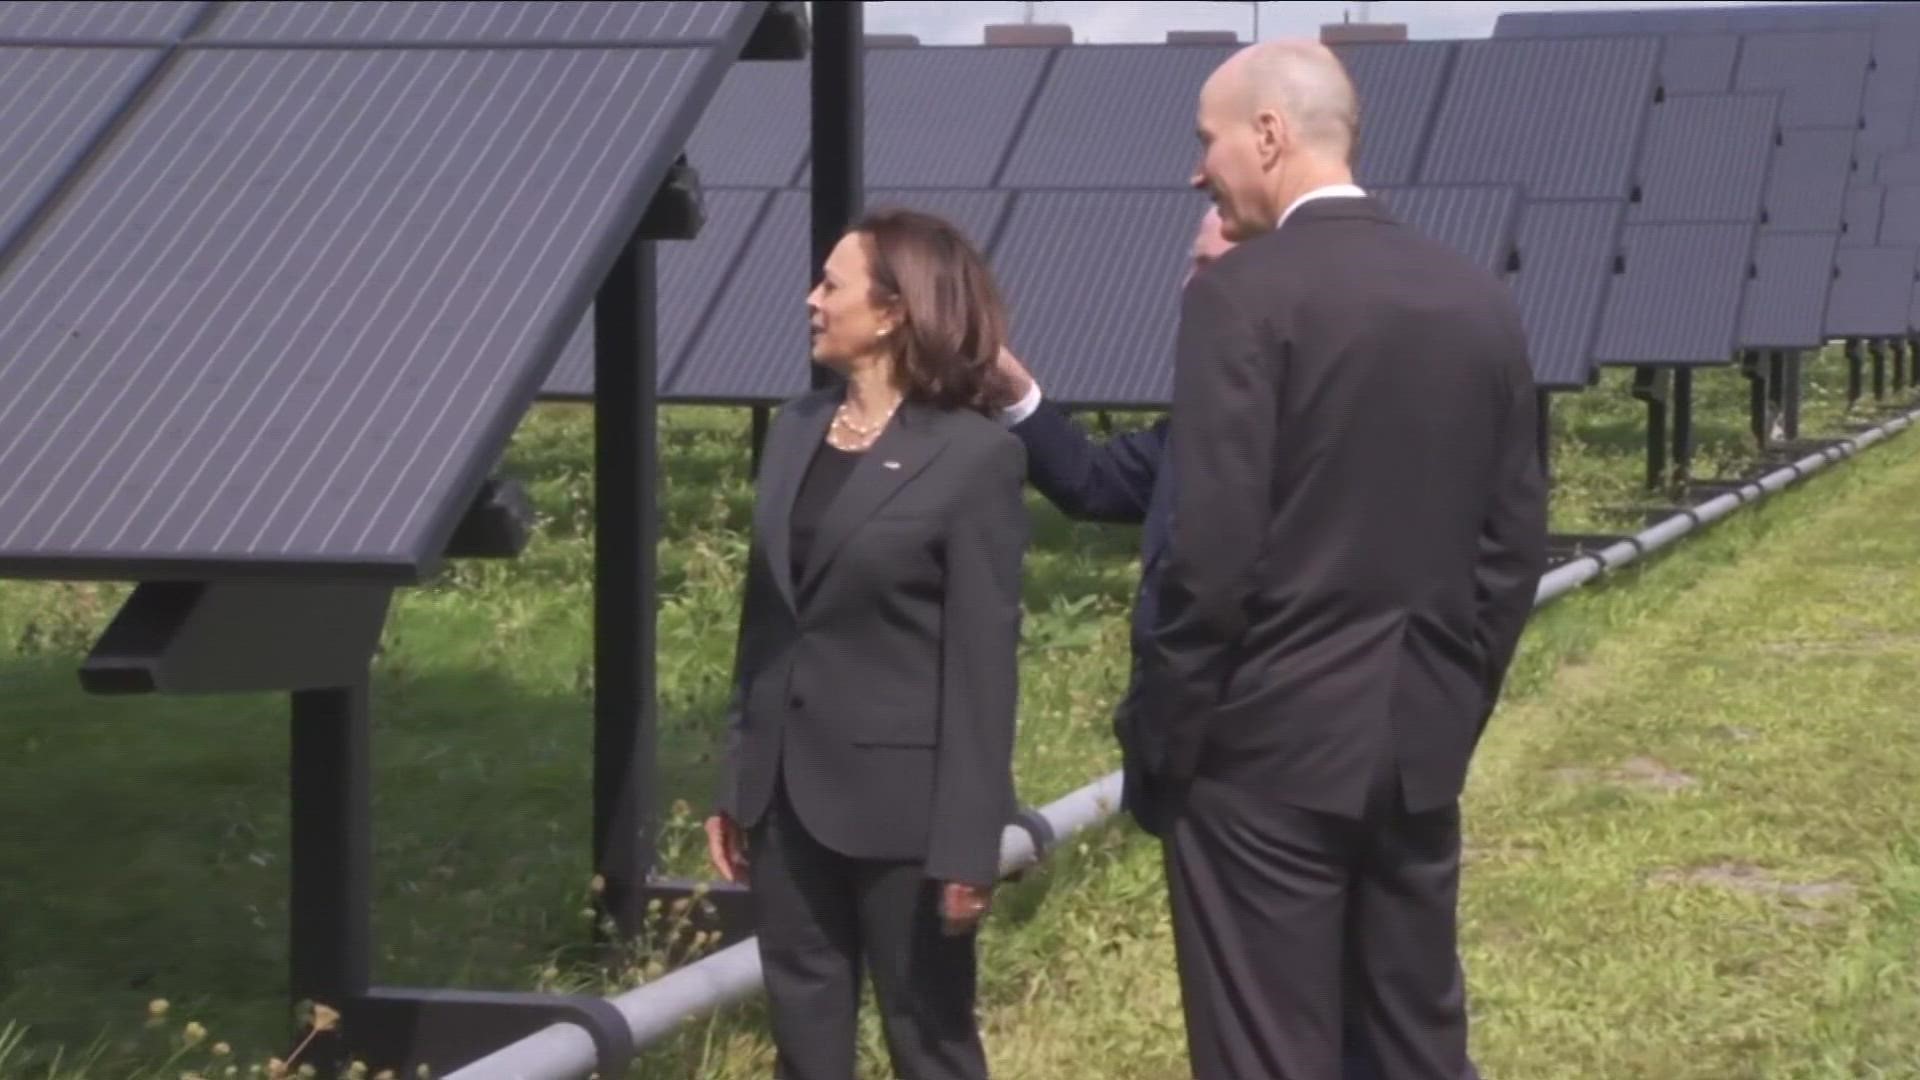 The vice president highlighted a few UB programs that focus on the climate crises and toured the solar array, which generates nearly a megawatt of electricity.